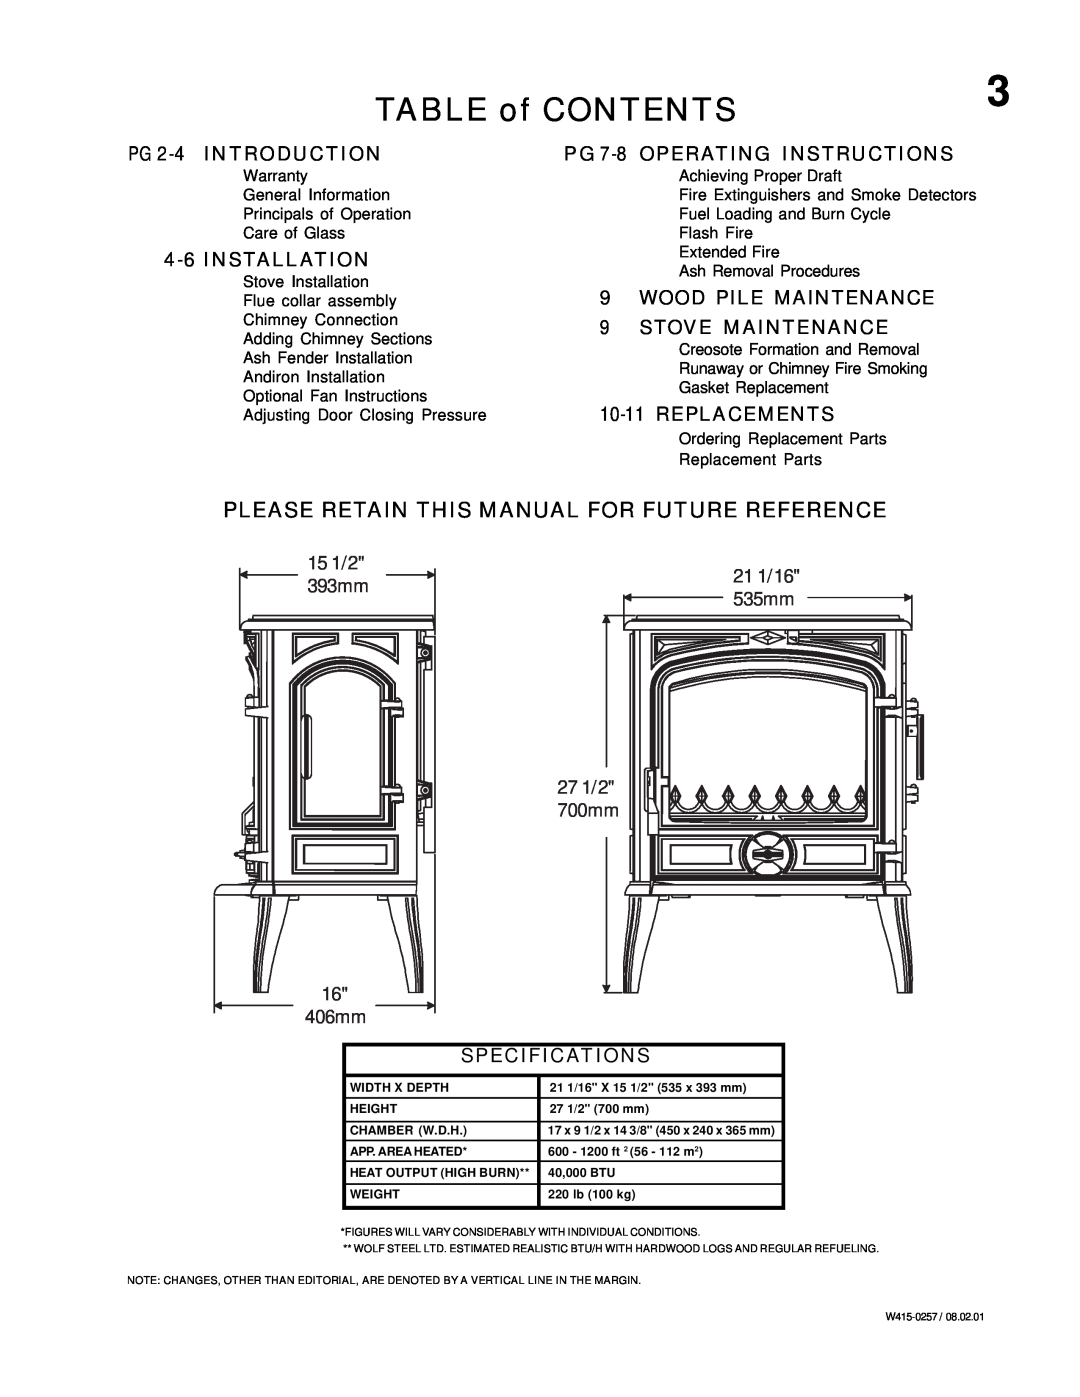 Napoleon Fireplaces Savoy Please Retain This Manual For Future Reference, TABLE of CONTENTS, PG 2-4 INTRODUCTION, 15 1/2 